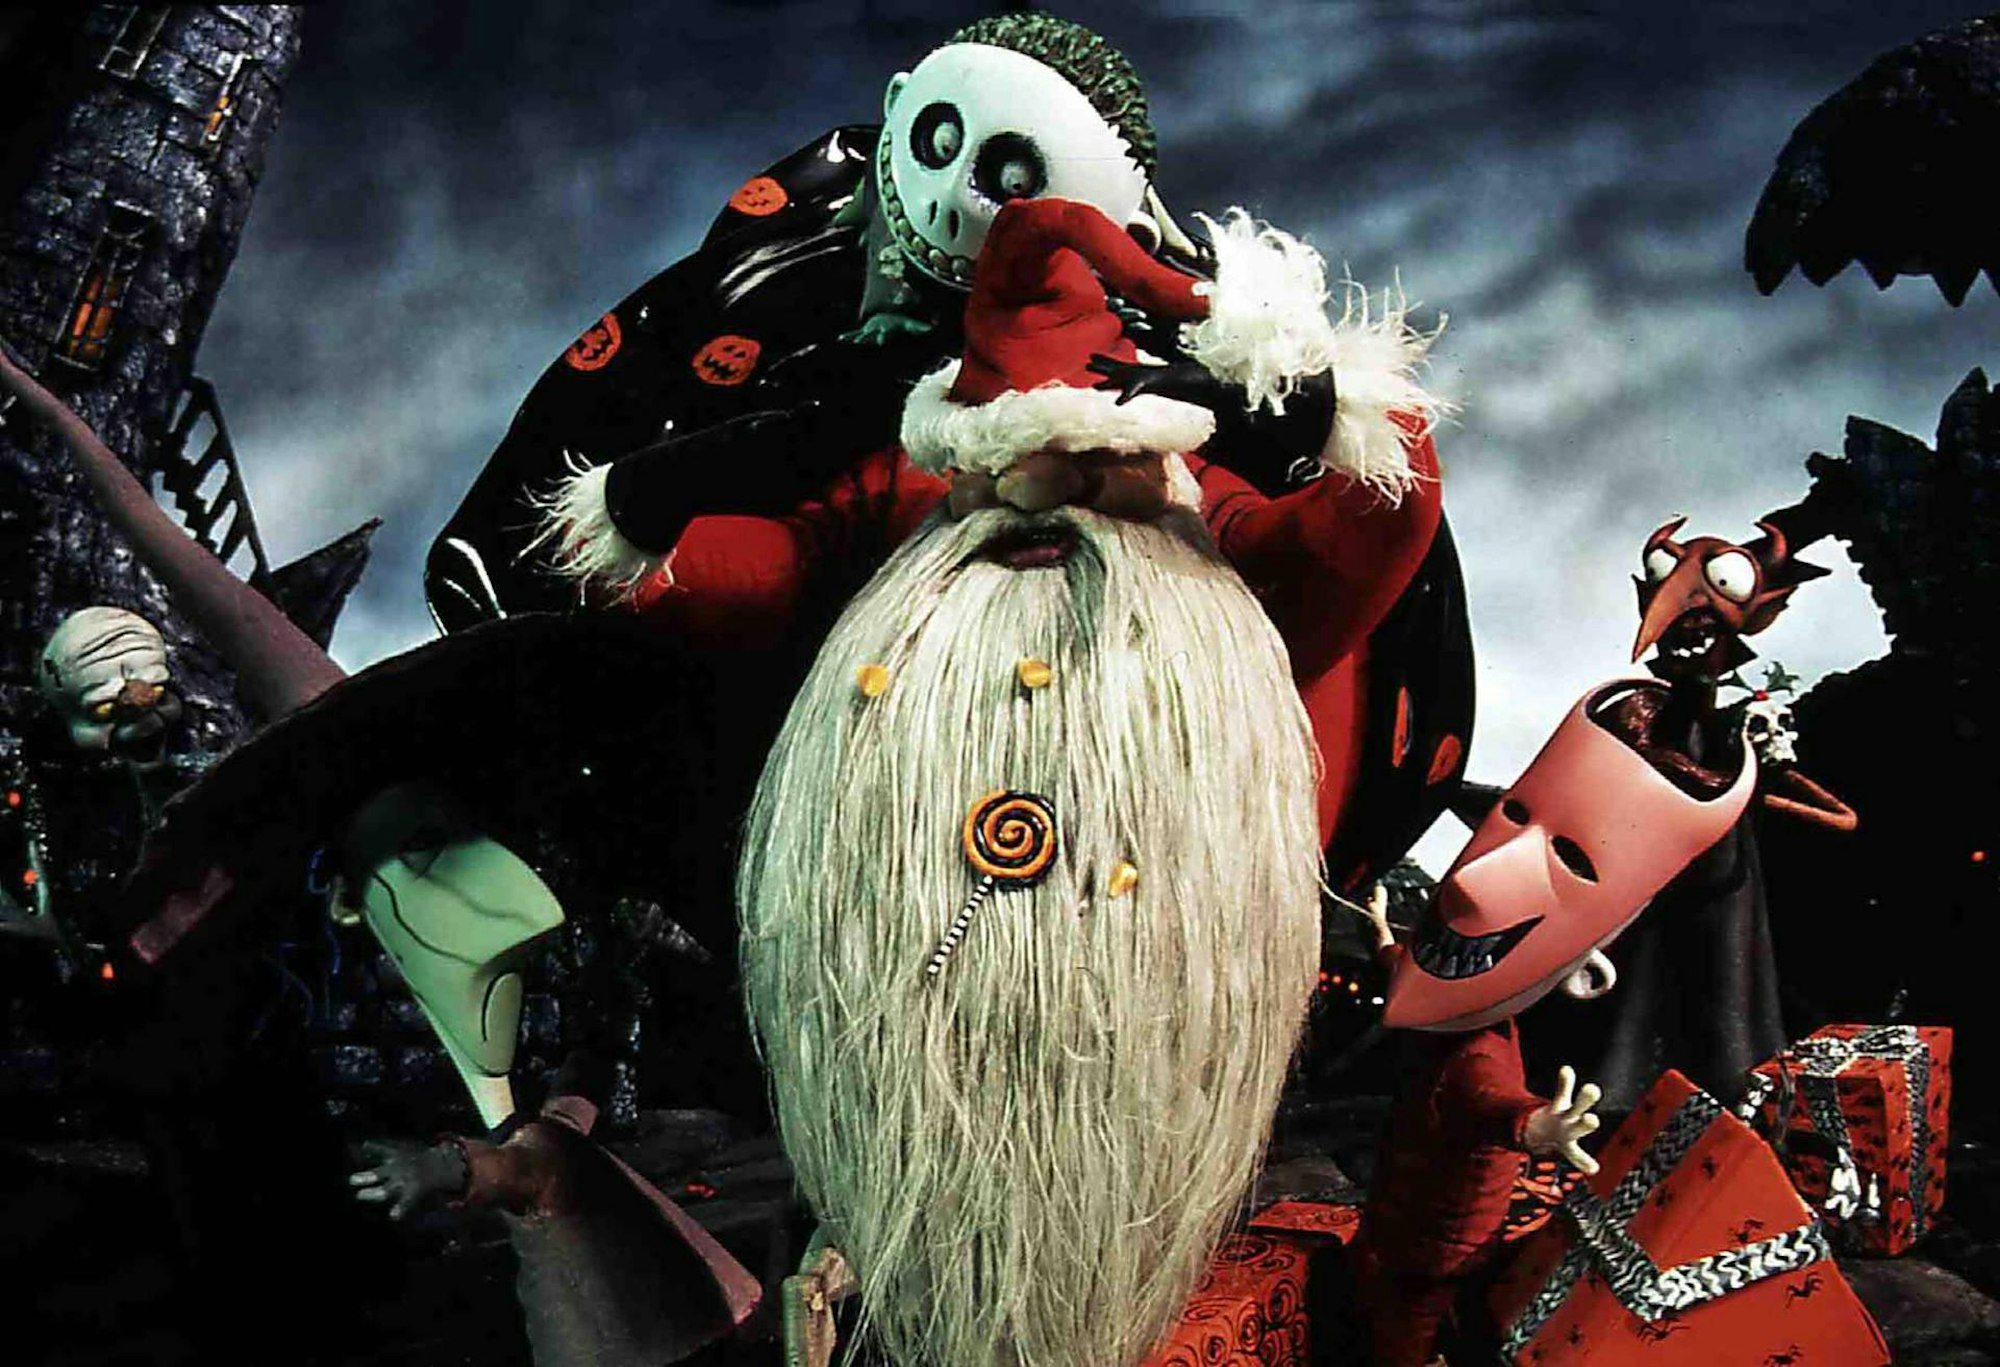 The Nightmare Before Christmas imago United Archives